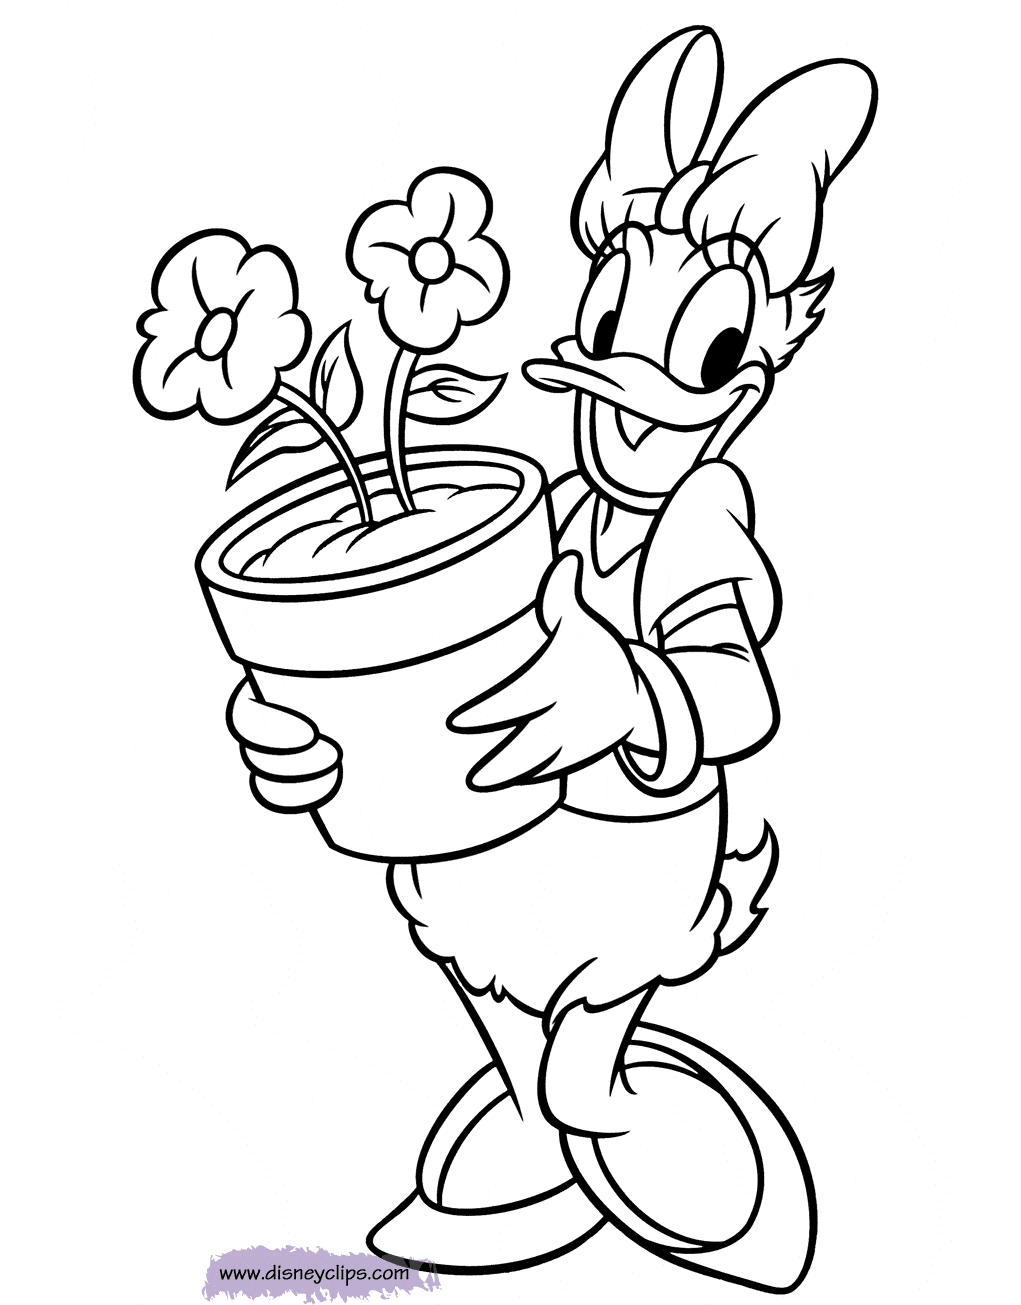 donald and daisy coloring pages donald duck and daisy duck coloring page coloring sheets coloring and donald pages daisy 